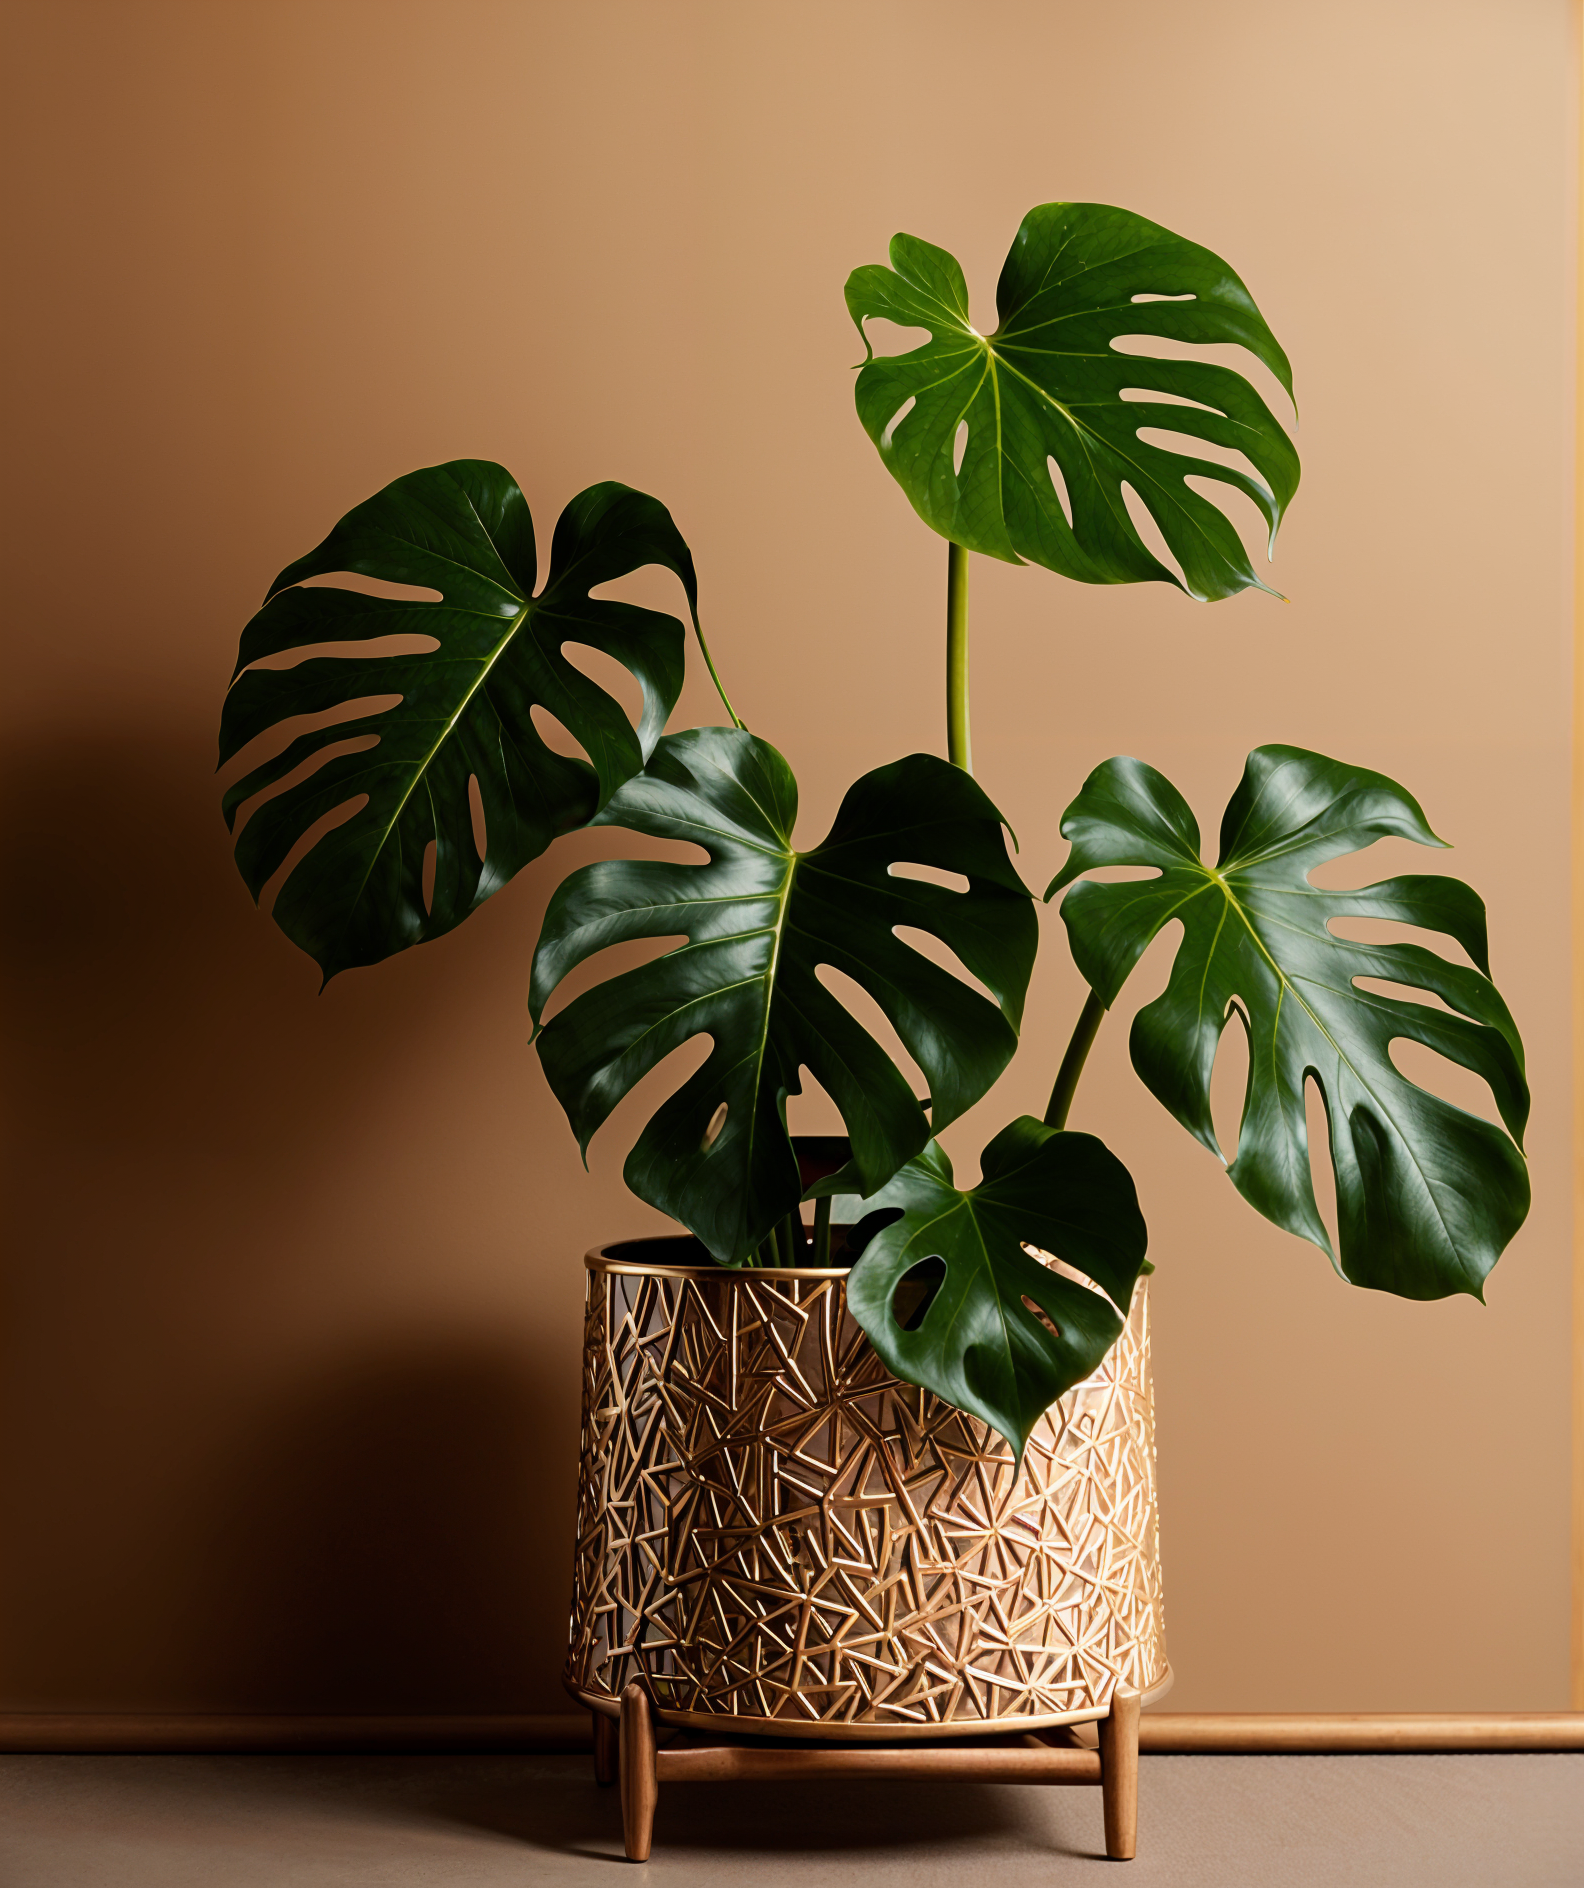 Highly detailed Monstera deliciosa plant in a planter, with clear lighting and a dark background.